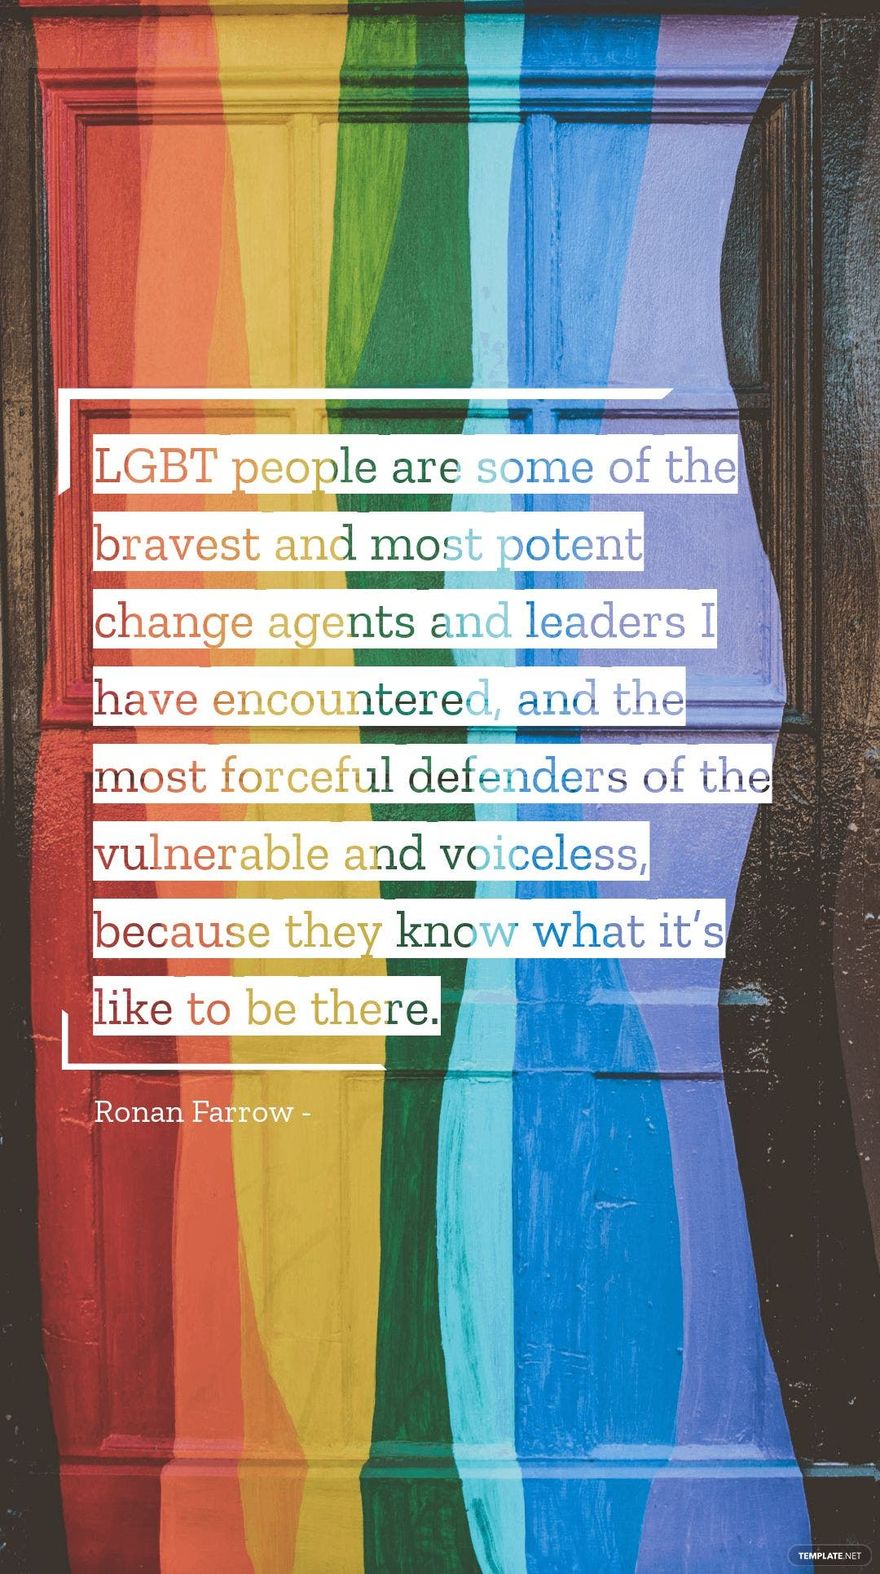 Ronan Farrow - LGBT people are some of the bravest and most potent change agents and leaders I have encountered, and the most forceful defenders of the vulnerable and voiceless, because they know what